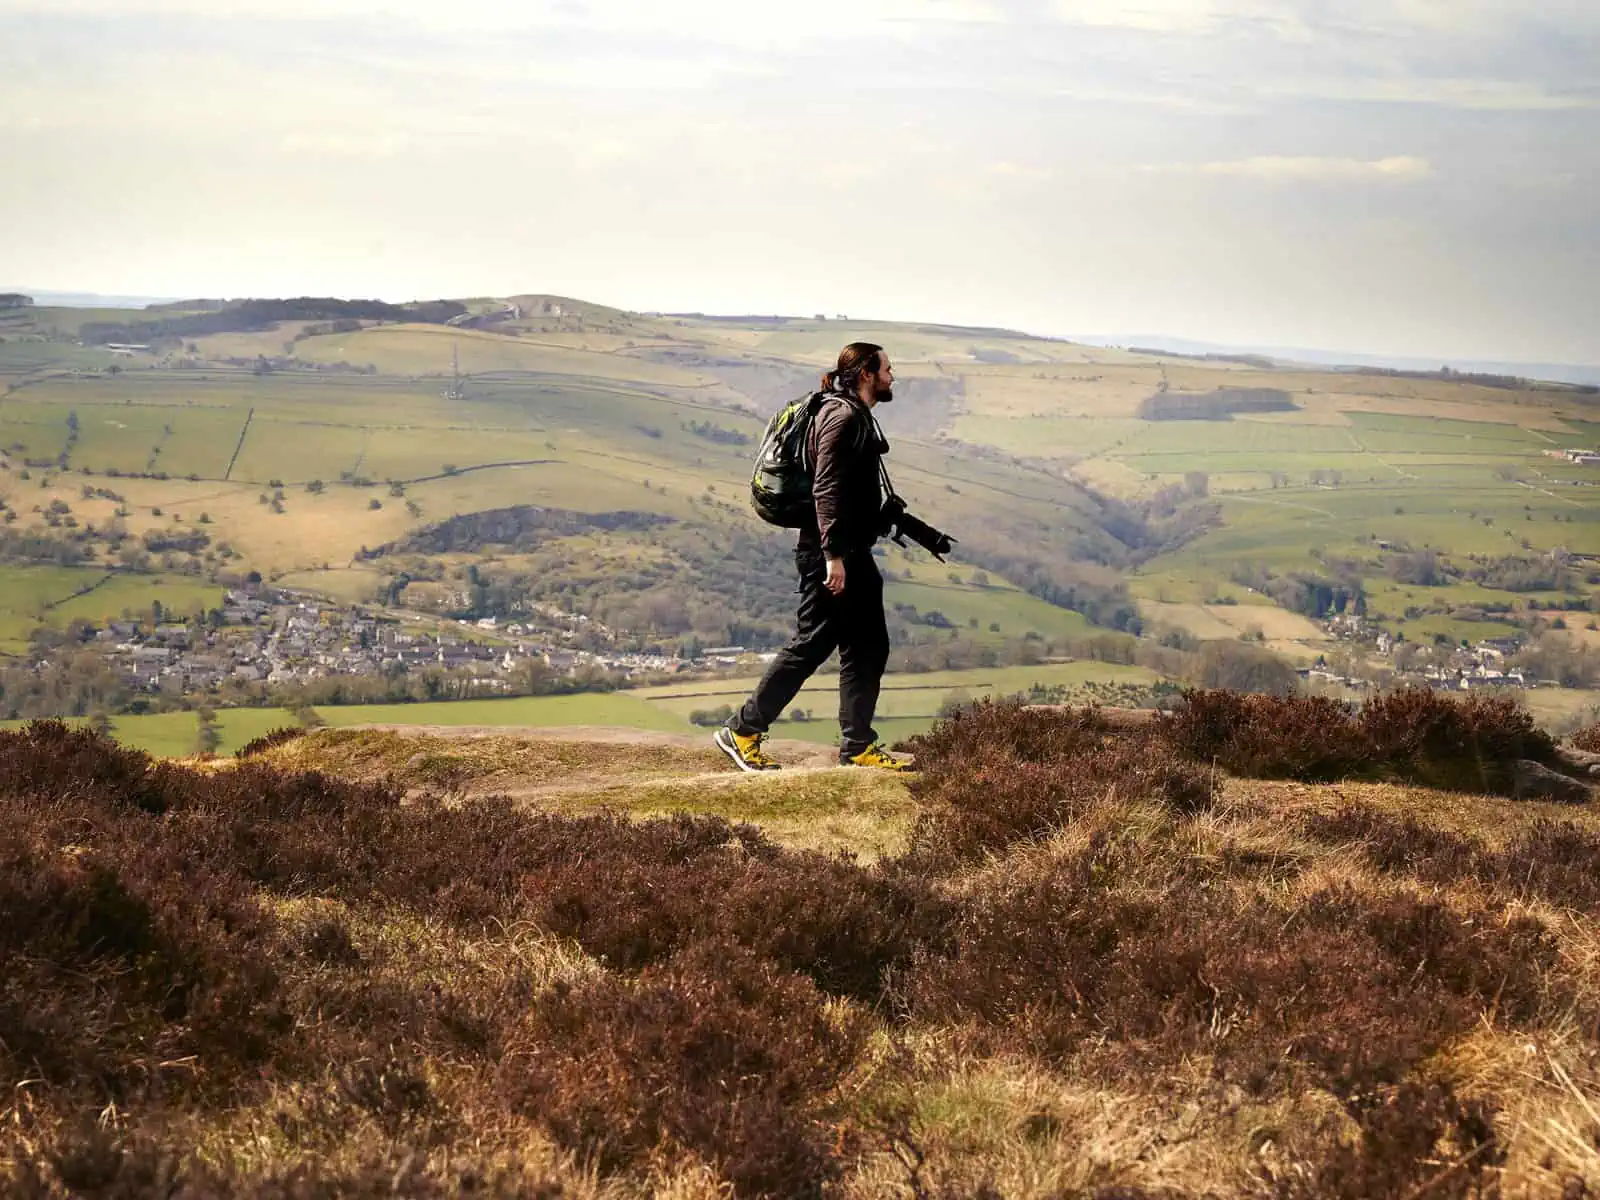 ID: A landscape image. Matt walks from left to right across the top of a hill. In the foreground is mossy grass and rocky crops. Behind him are hills which are greens and browns. The sky is a pale blue. He wears yellow shoes, black trousers and grey hoody. His bag is blue and green and he has a black camera with long lens around his neck. It looks to be a warm sunny day.